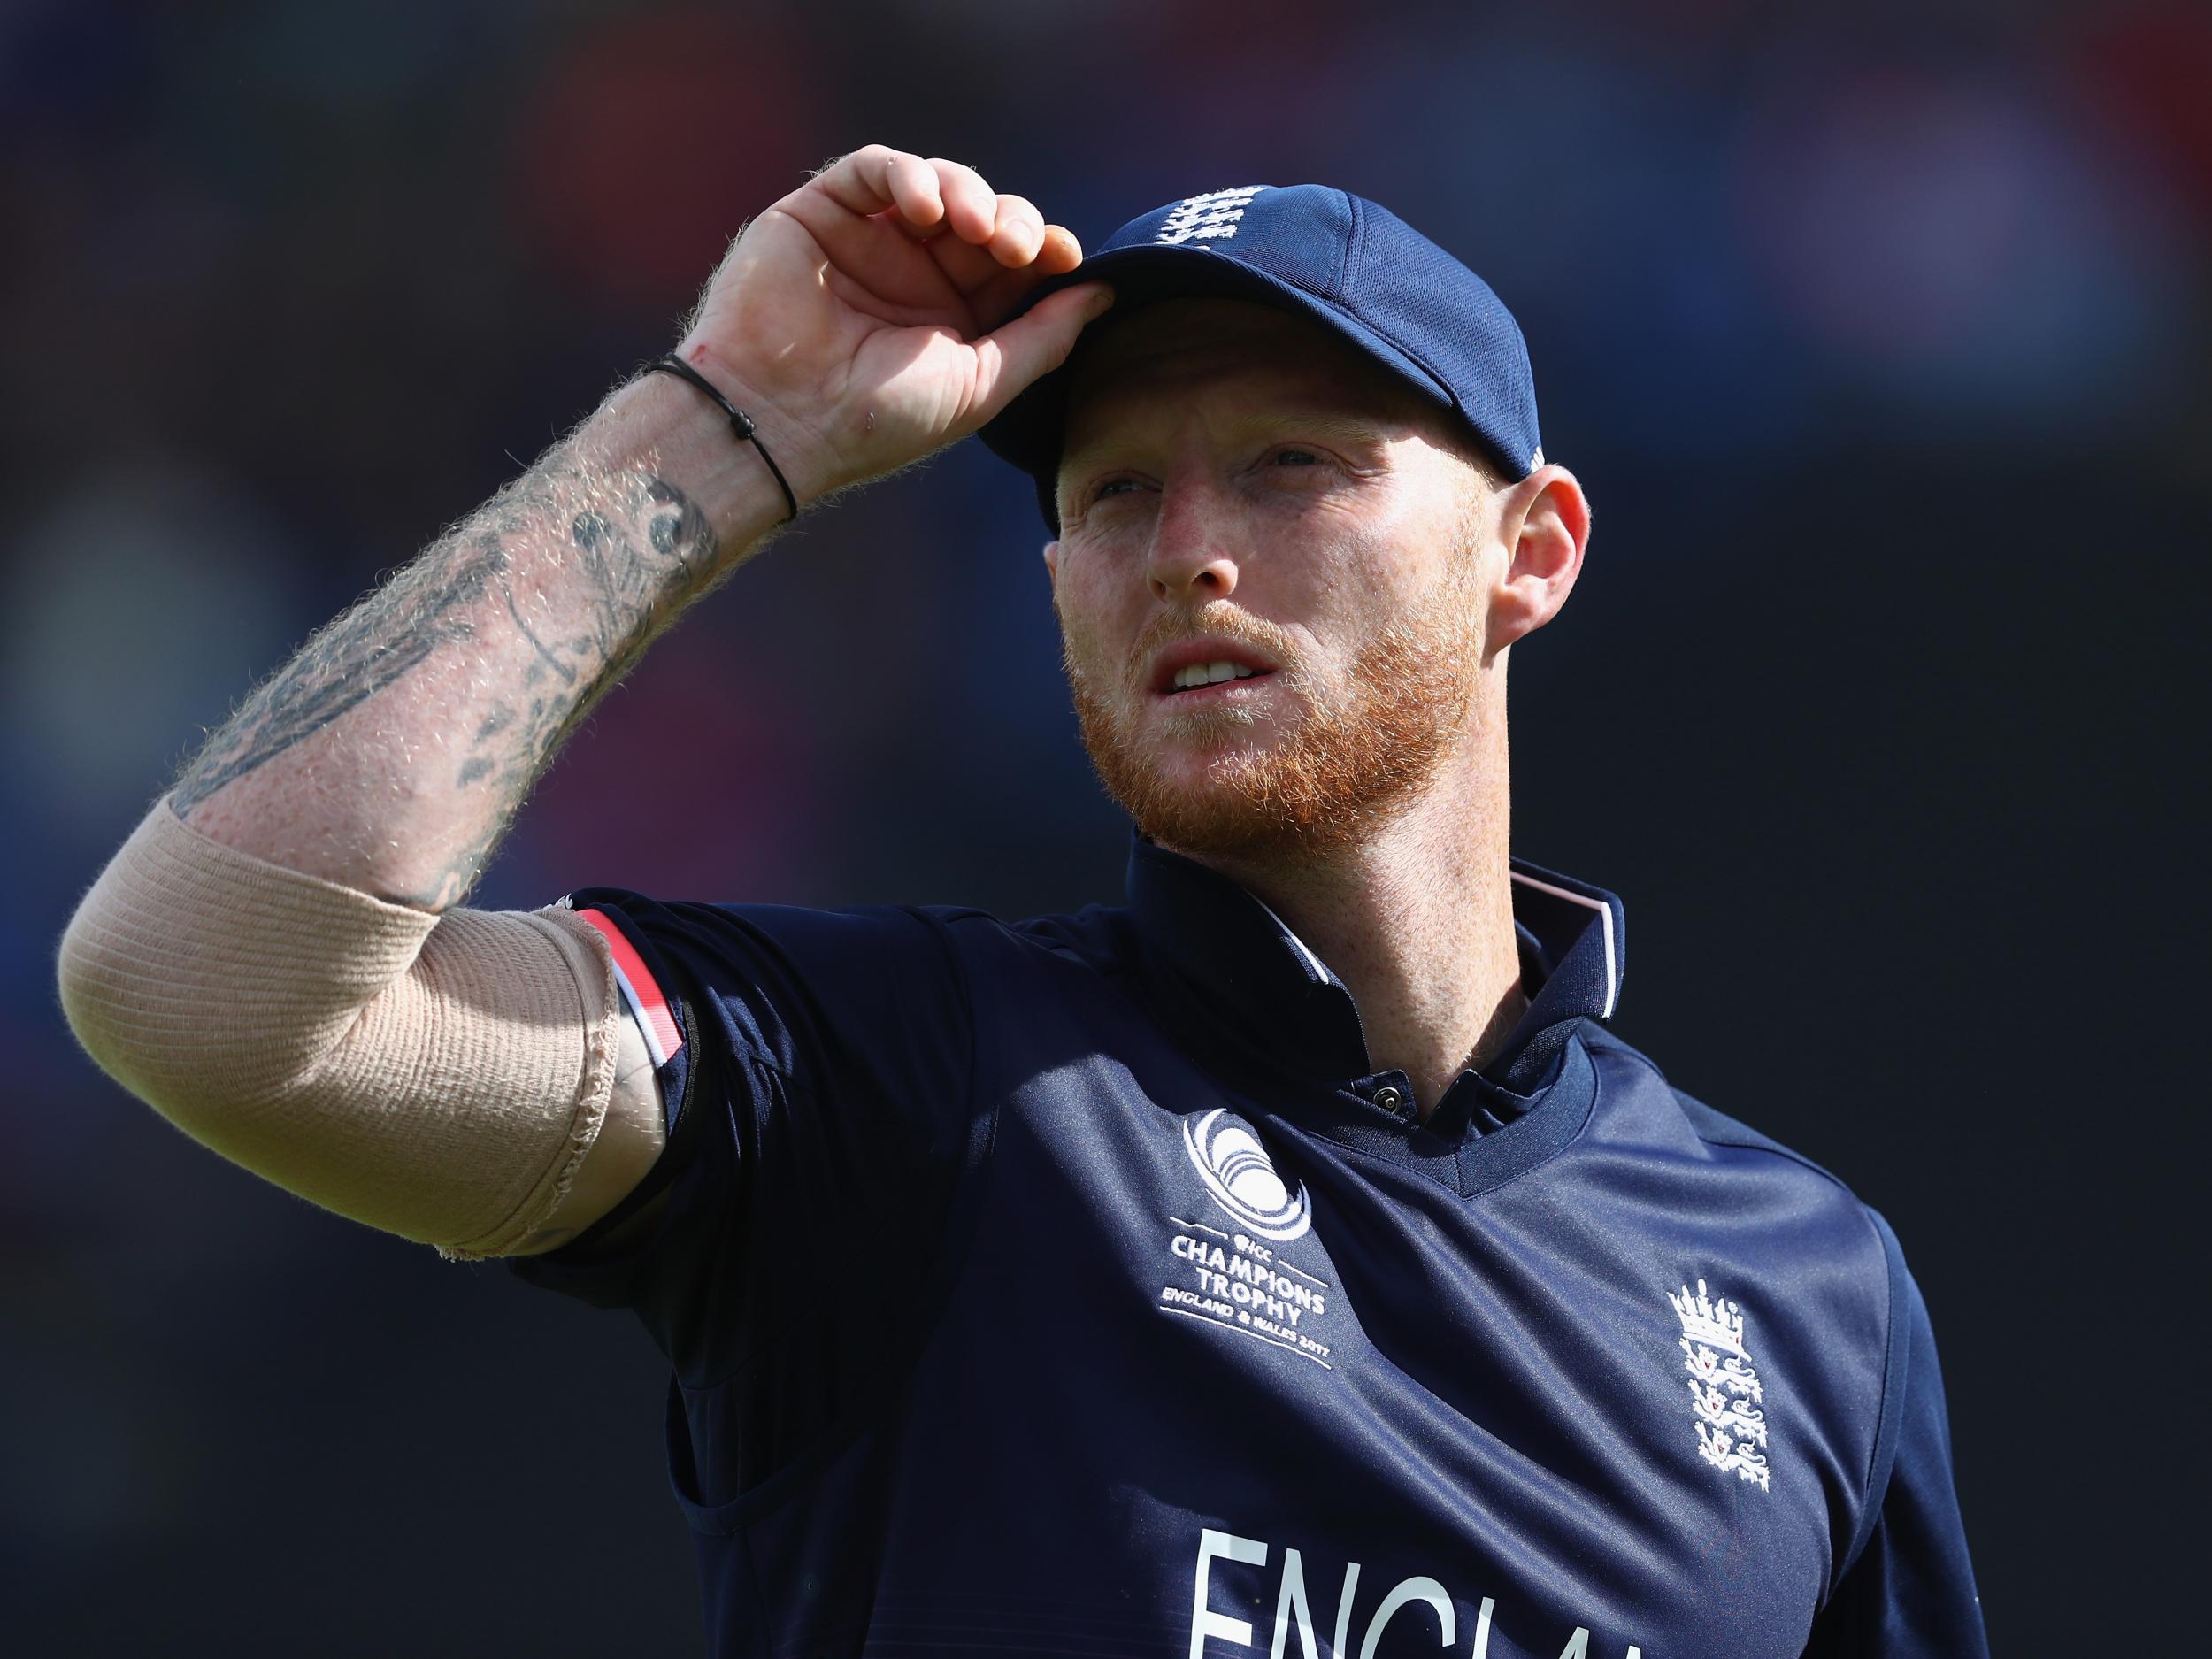 Stokes will next face Australia at Brisbane in the Ashes series